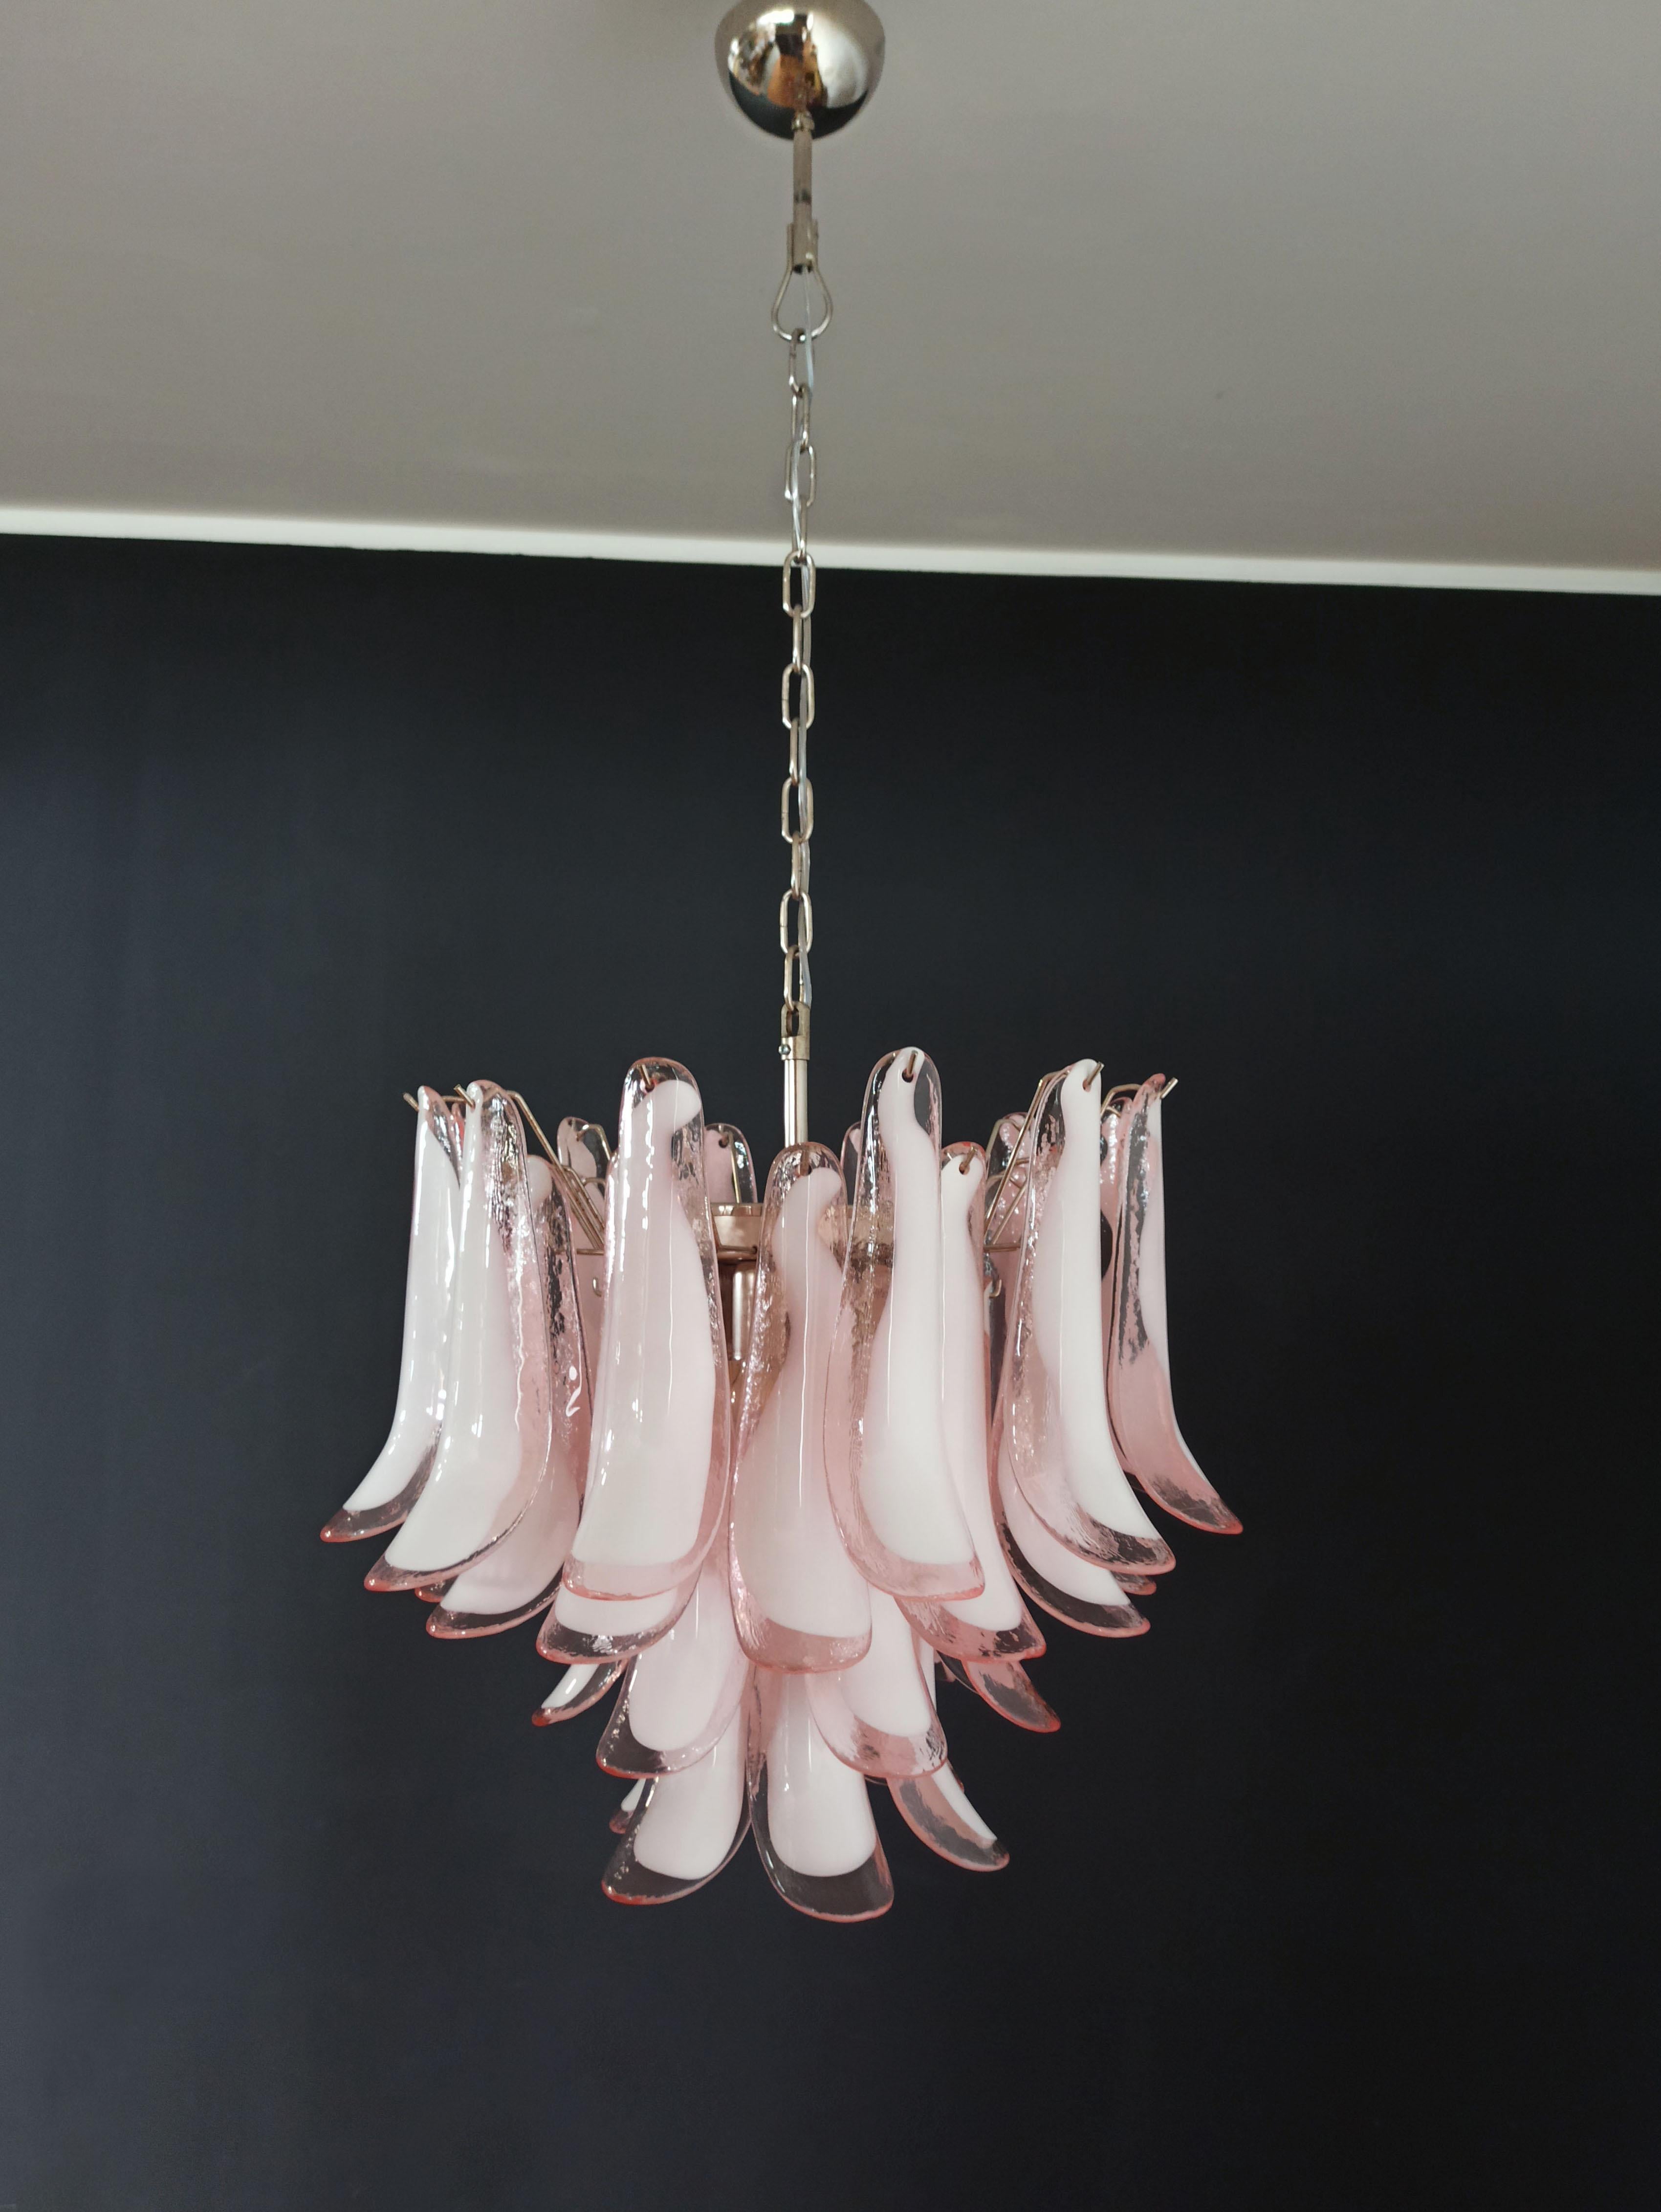 1970s Murano Italian glass chandelier. Fantastic chandelier with pink and white “lattimo” glasses, nickel-plated metal frame. It has 36 big monumental petals glass. The glasses are very high quality, the photos do not do the beauty, luster of these